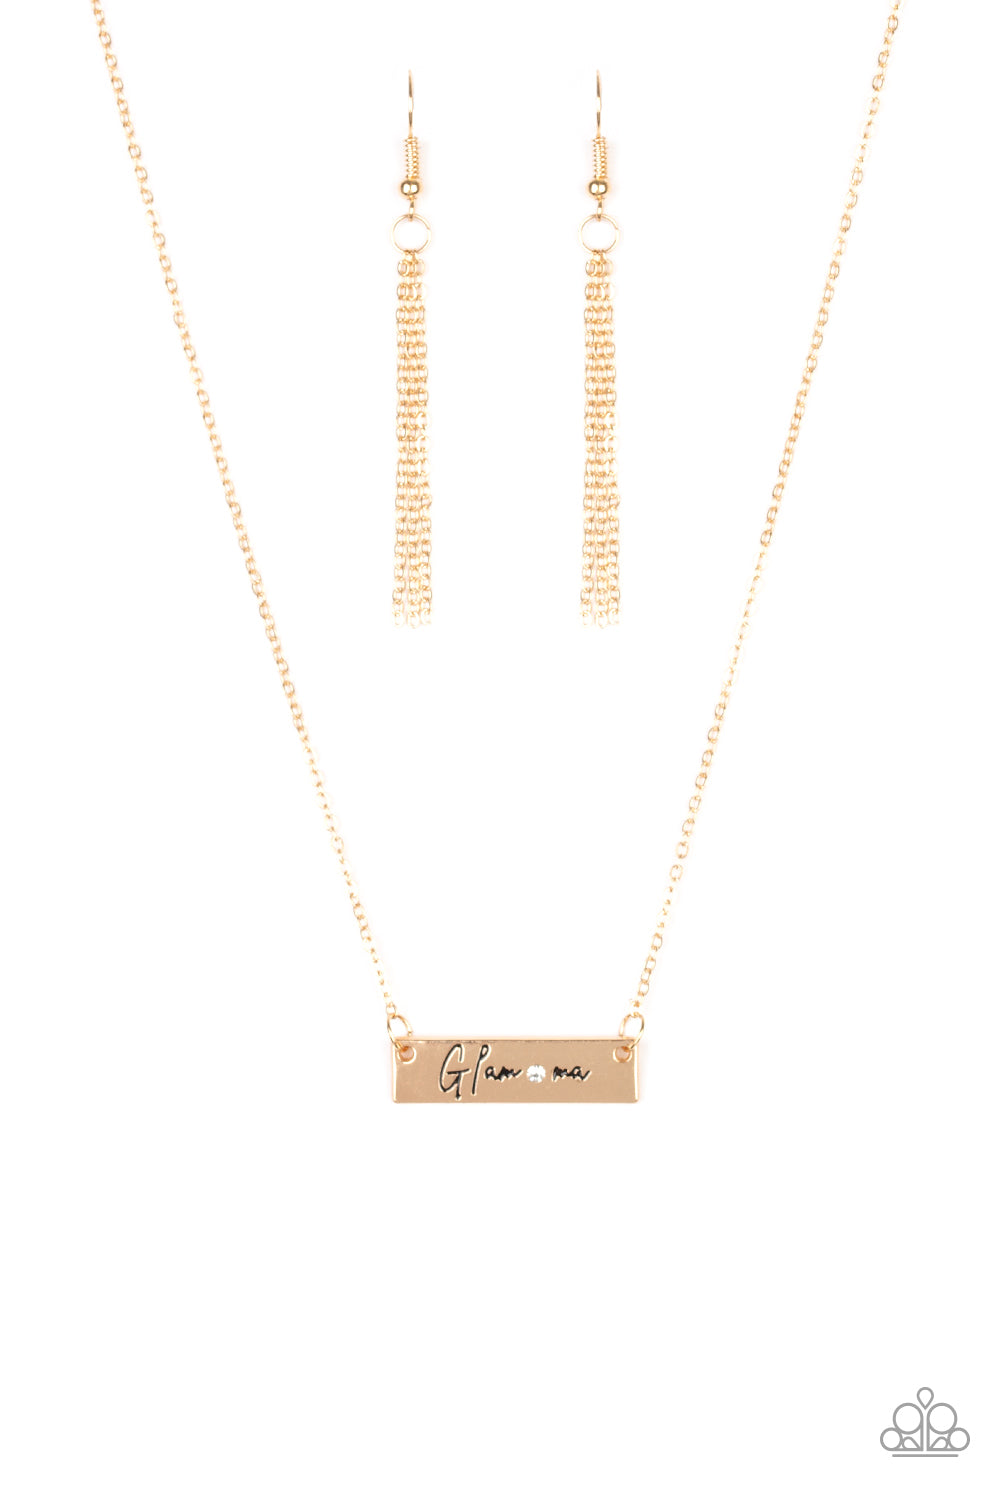 The GLAM-ma Gold Necklace